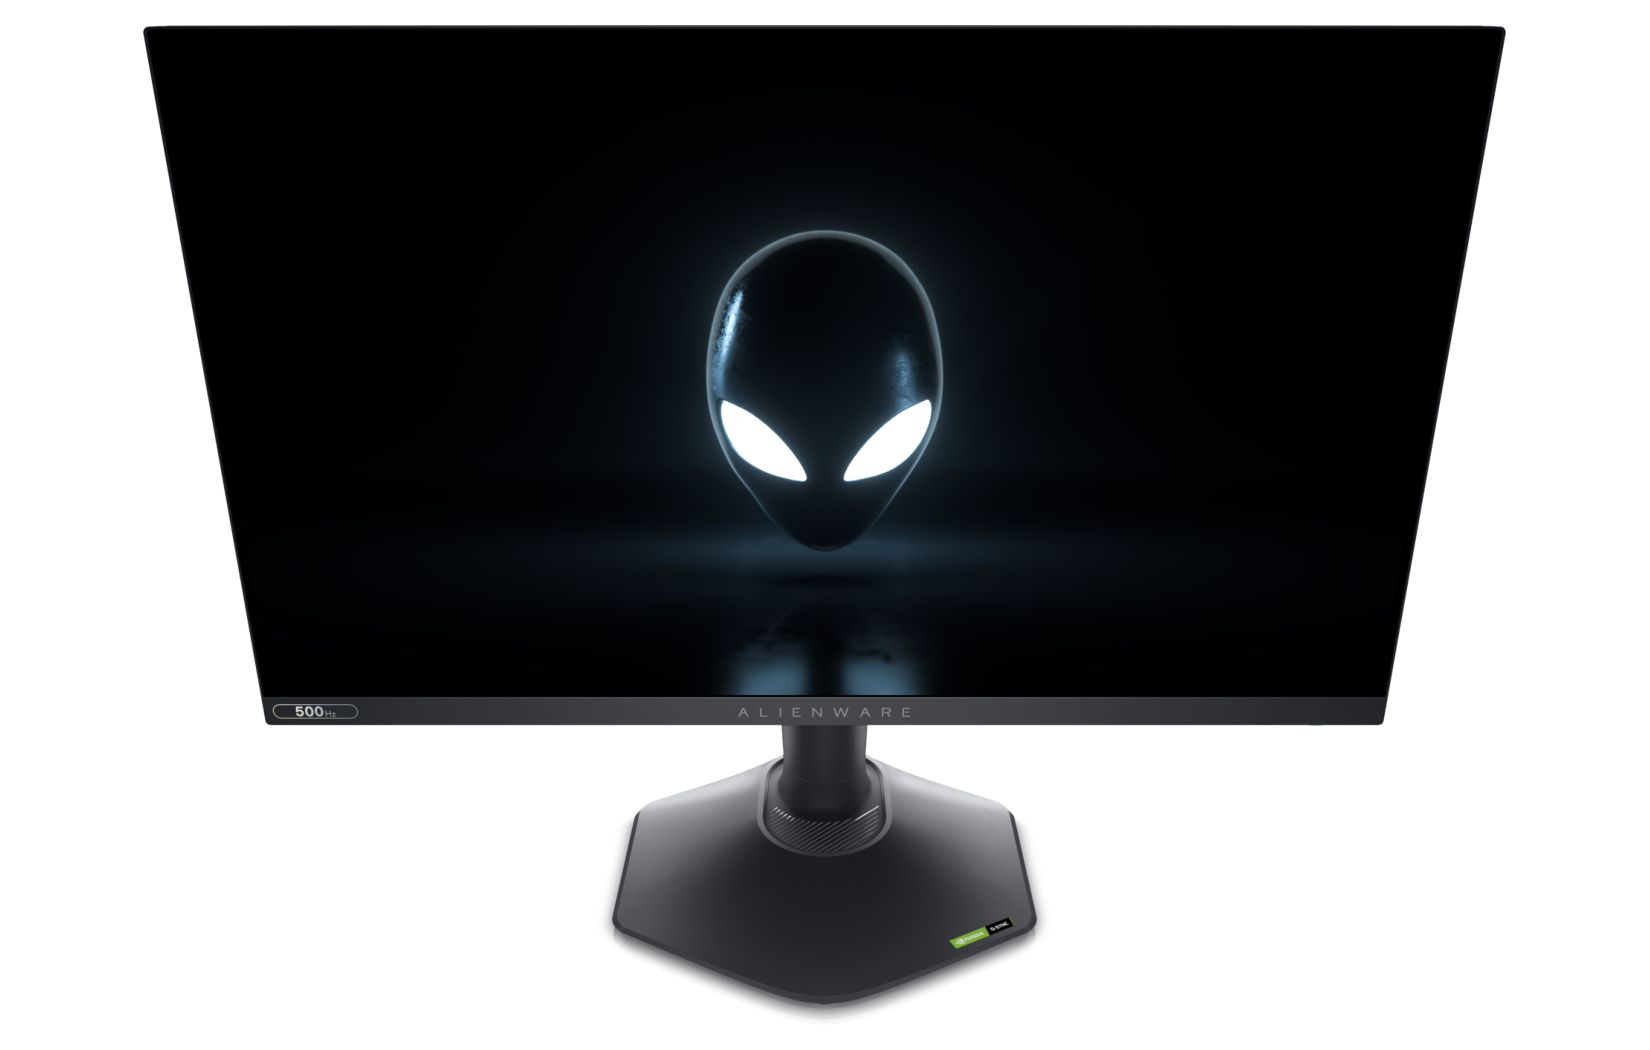 Alienware introduces its first gaming monitor with a 360Hz refresh